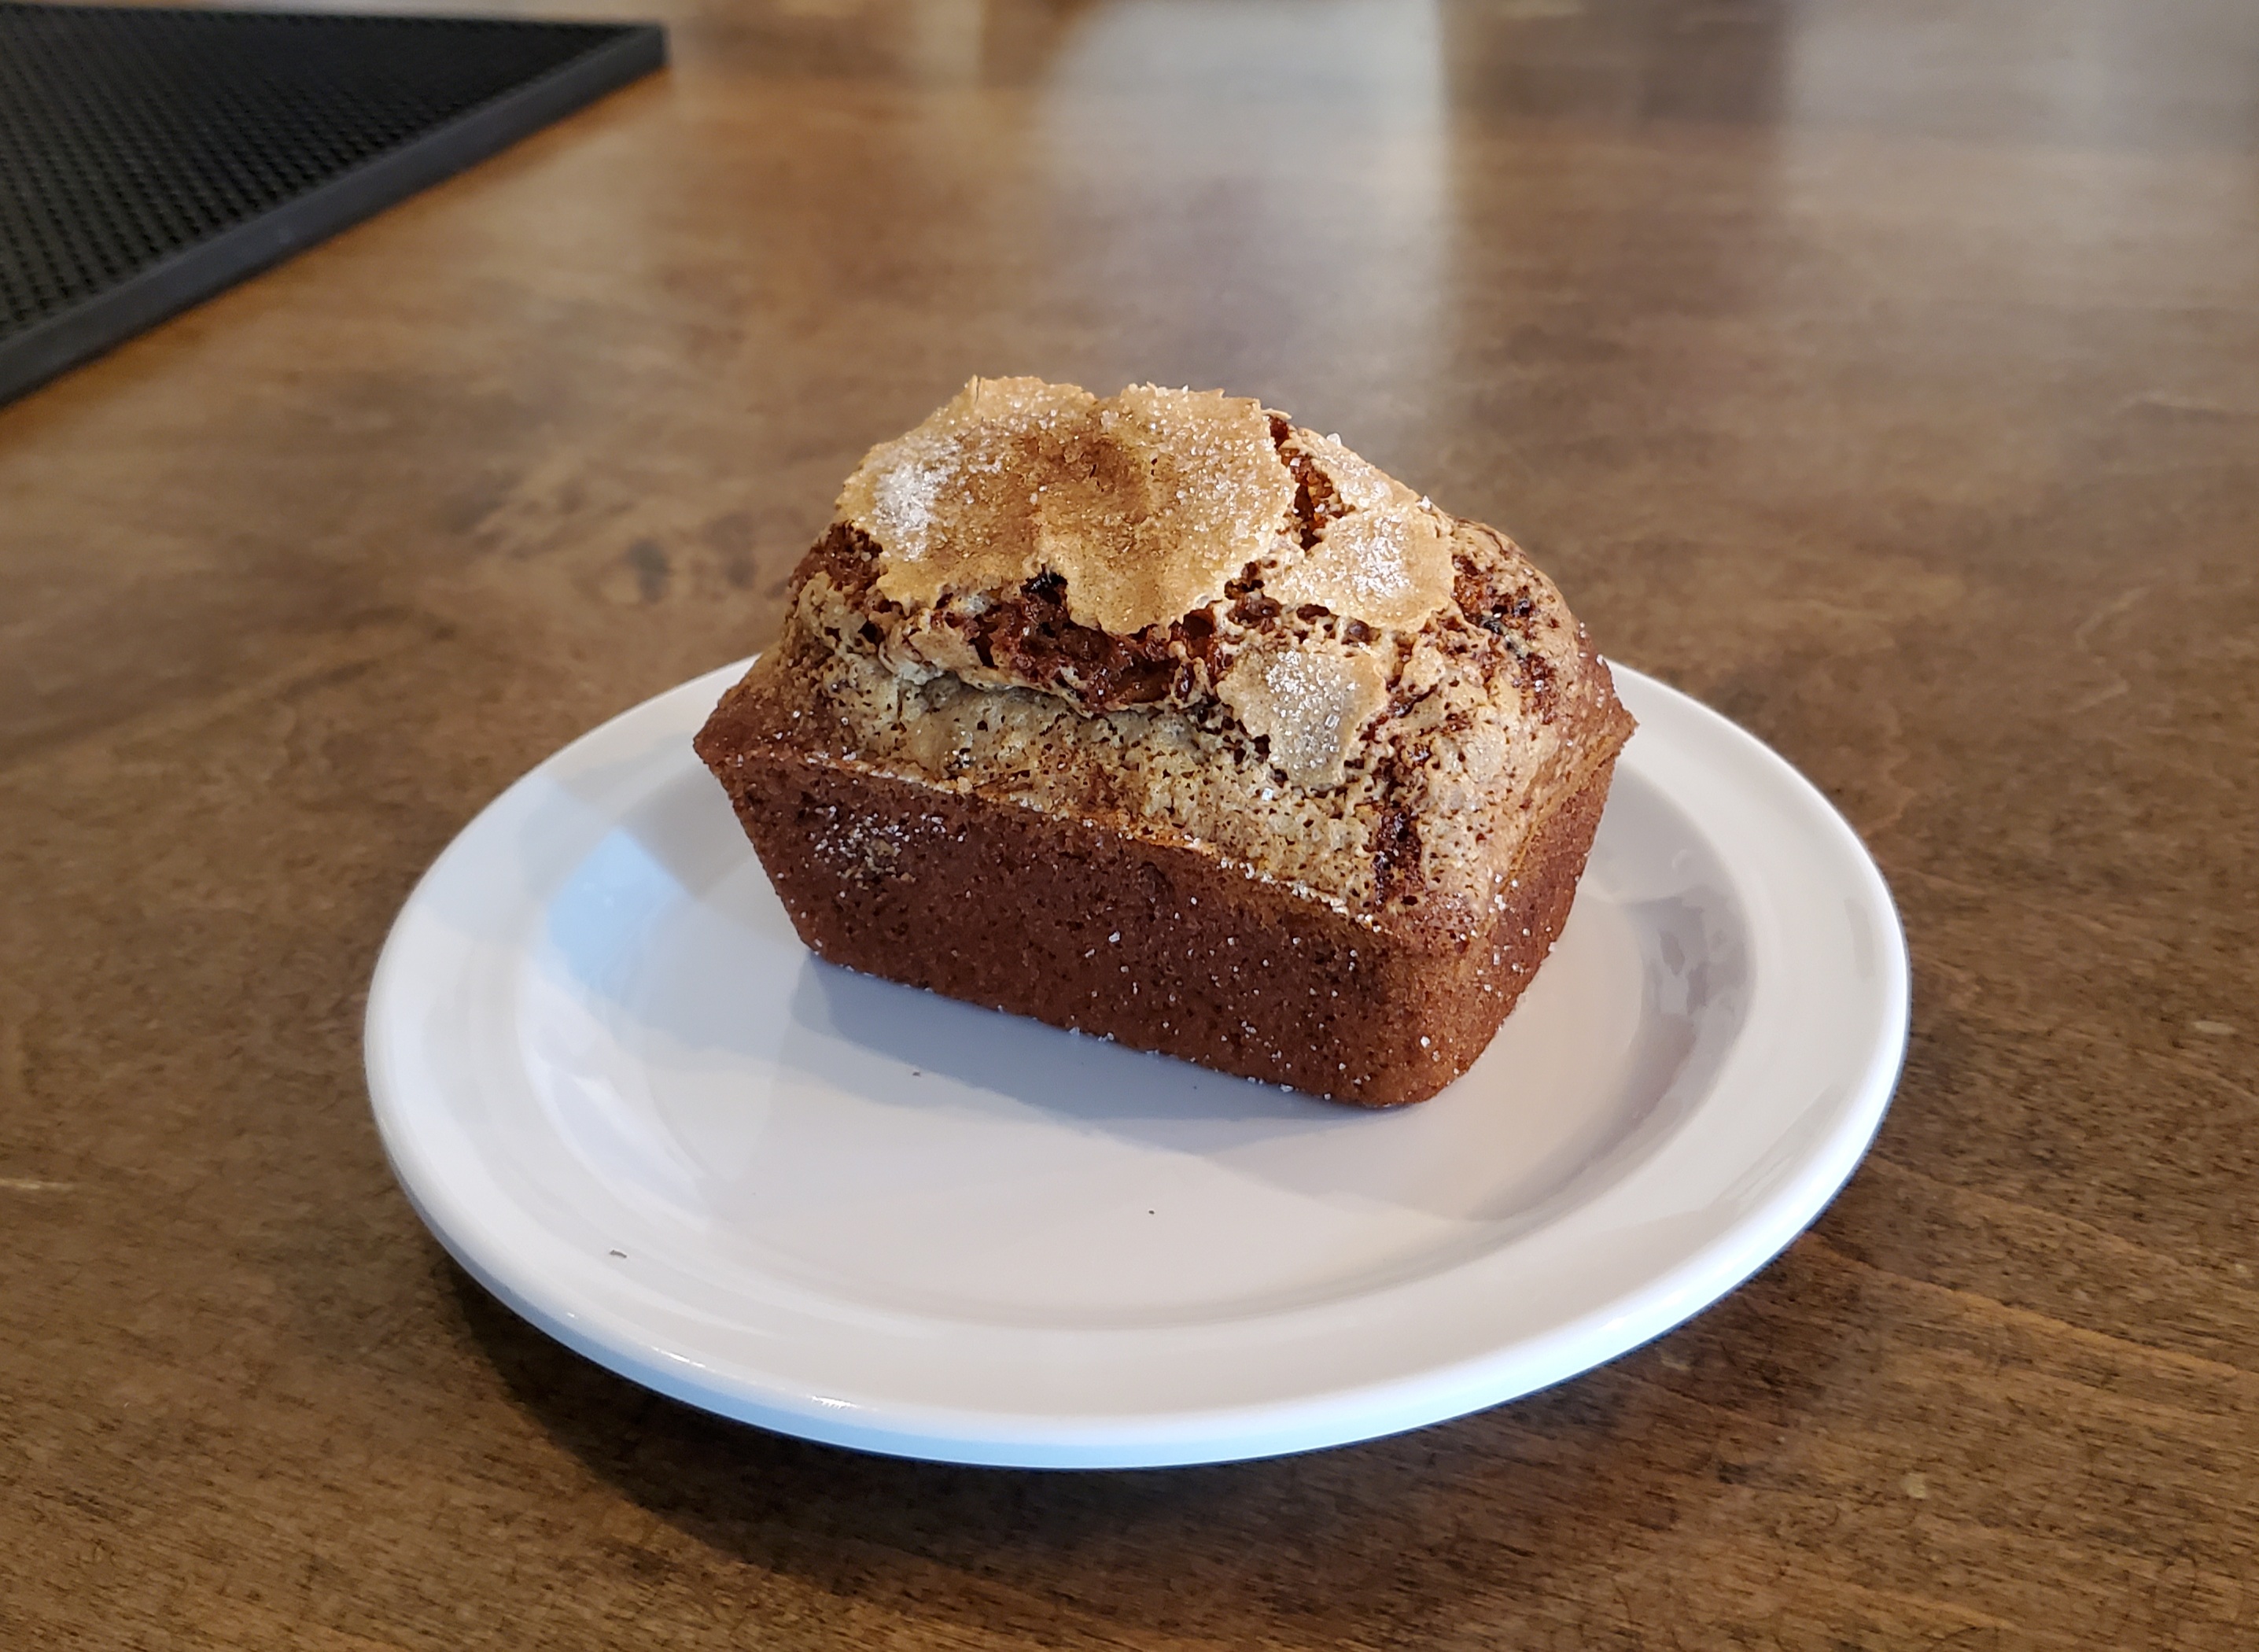 On a brown table, there is a mini loaf of zucchini bread on a small white circular plate. Photo by Rafay Khan.